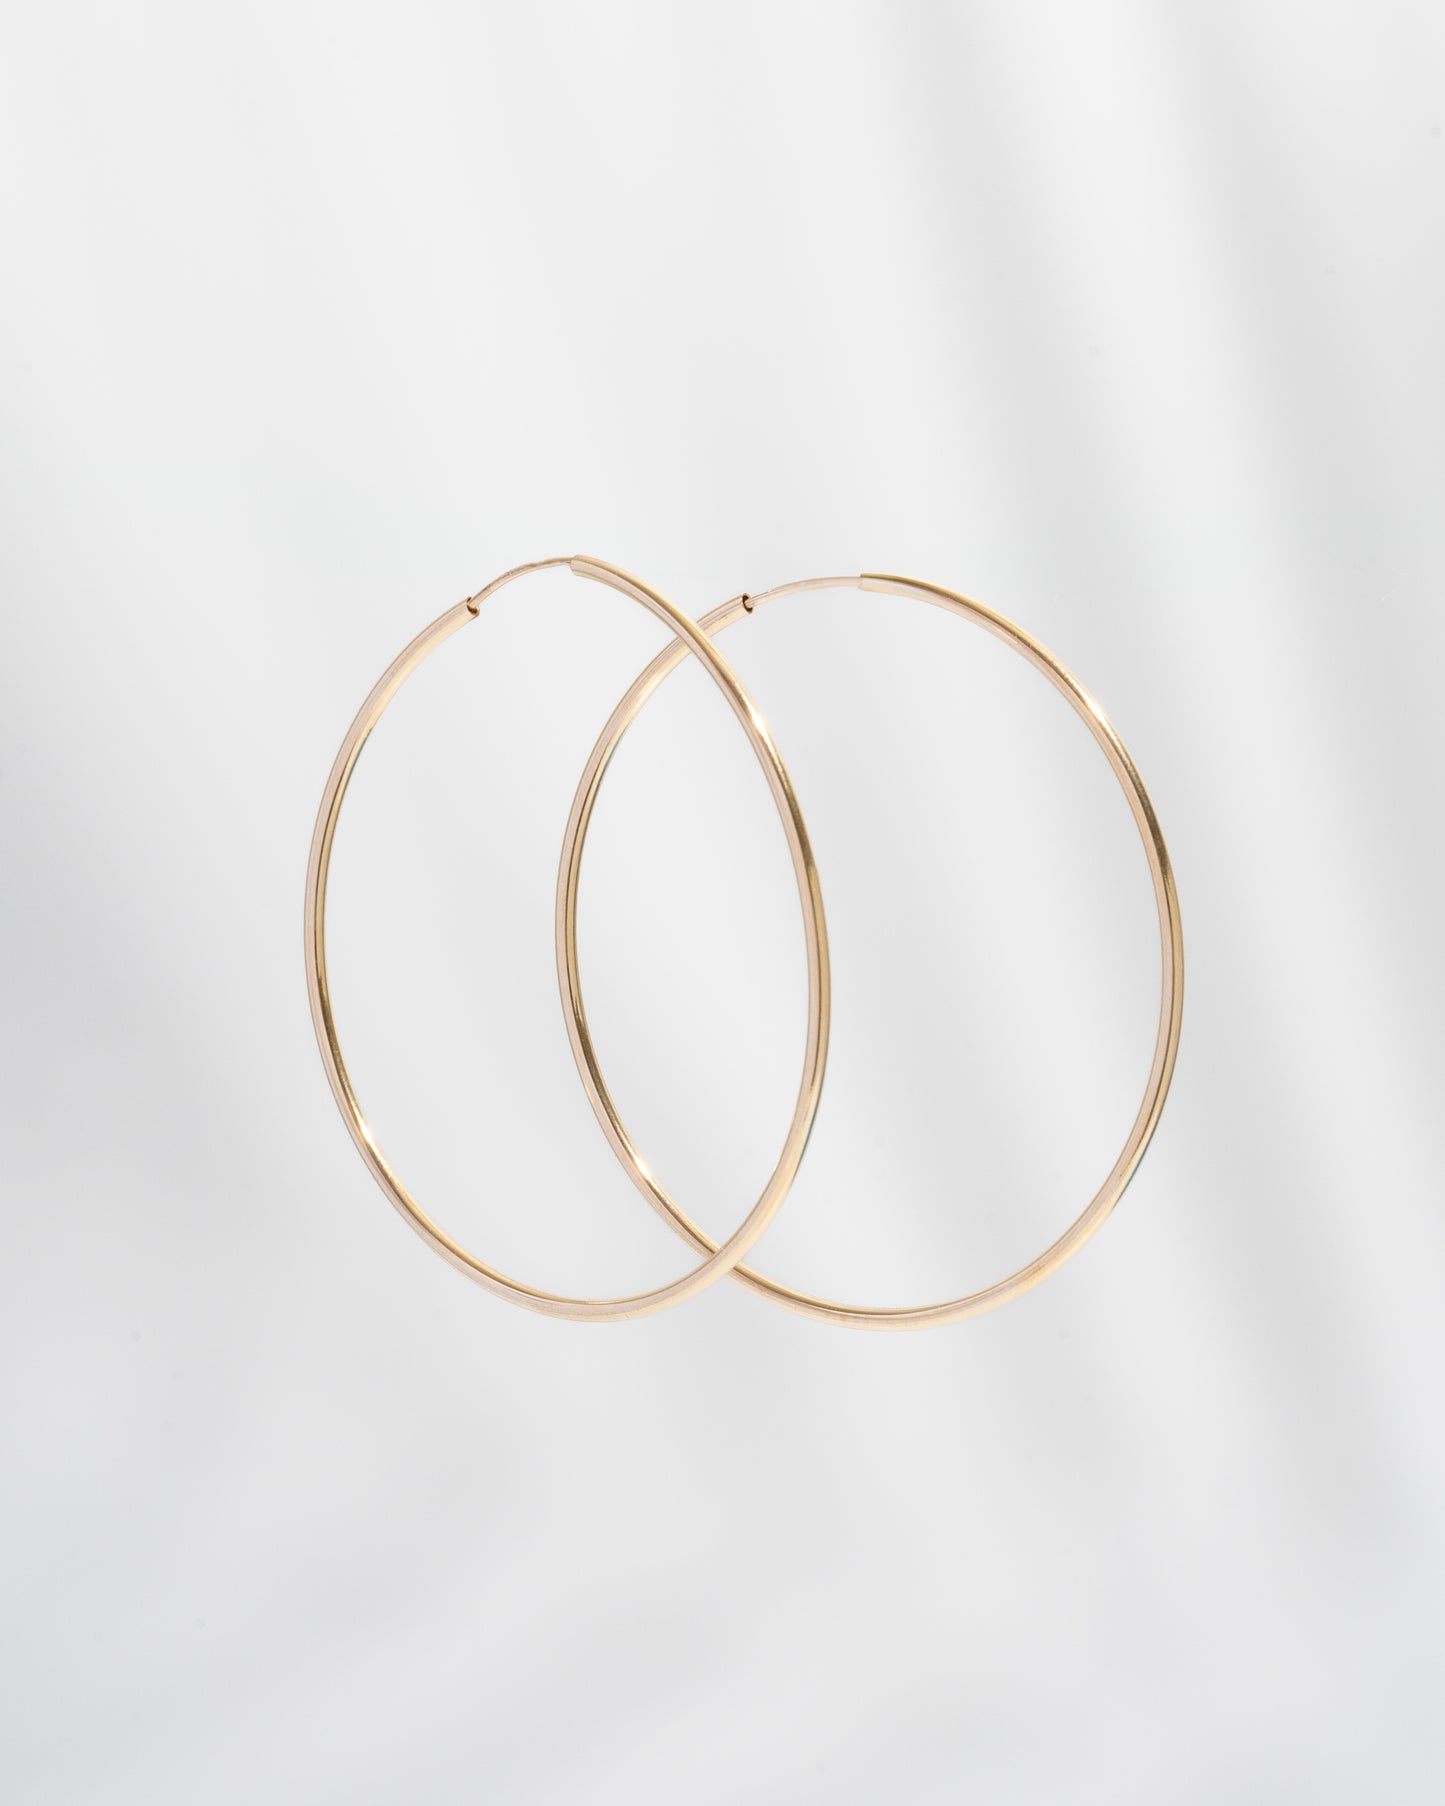 Everyday gold hoops (multiple sizes available)